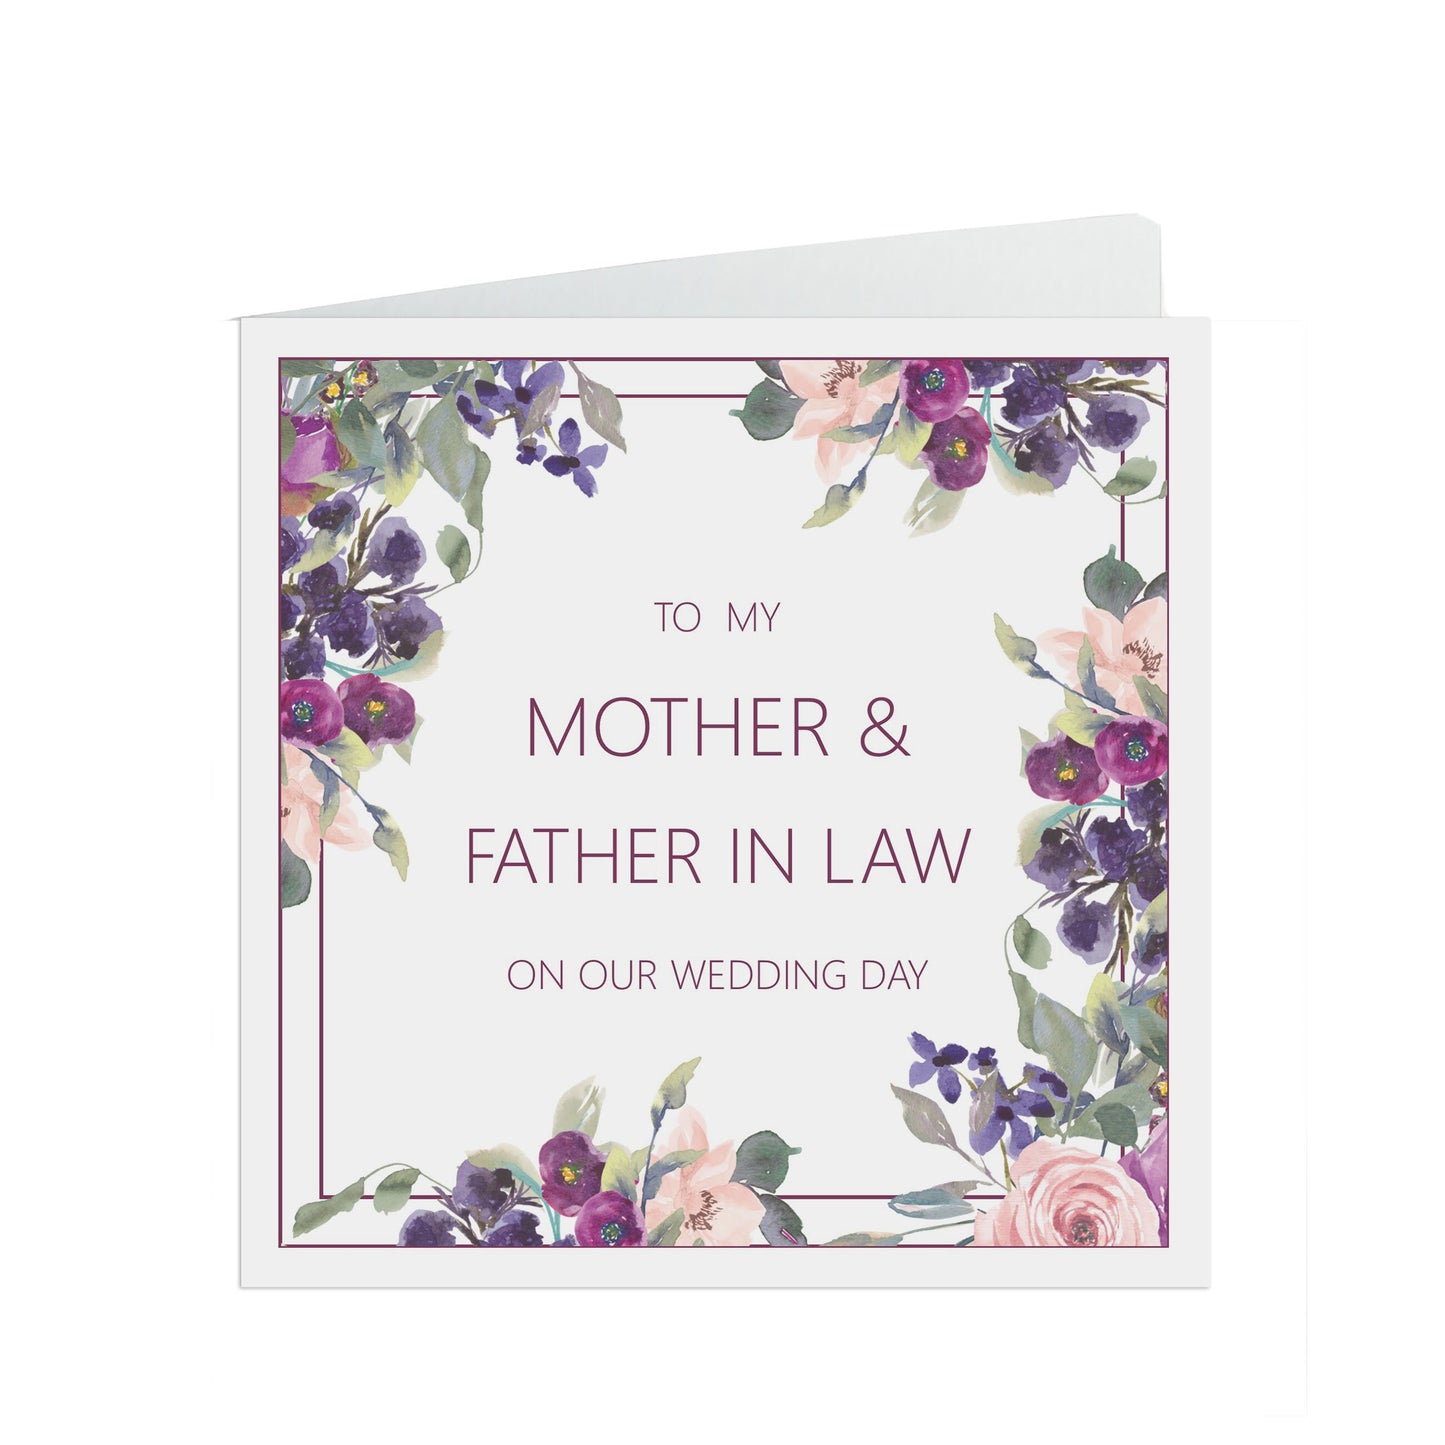 Mother & Father in law Wedding Day Card, Purple Floral 6x6 Inches With A Kraft Envelope